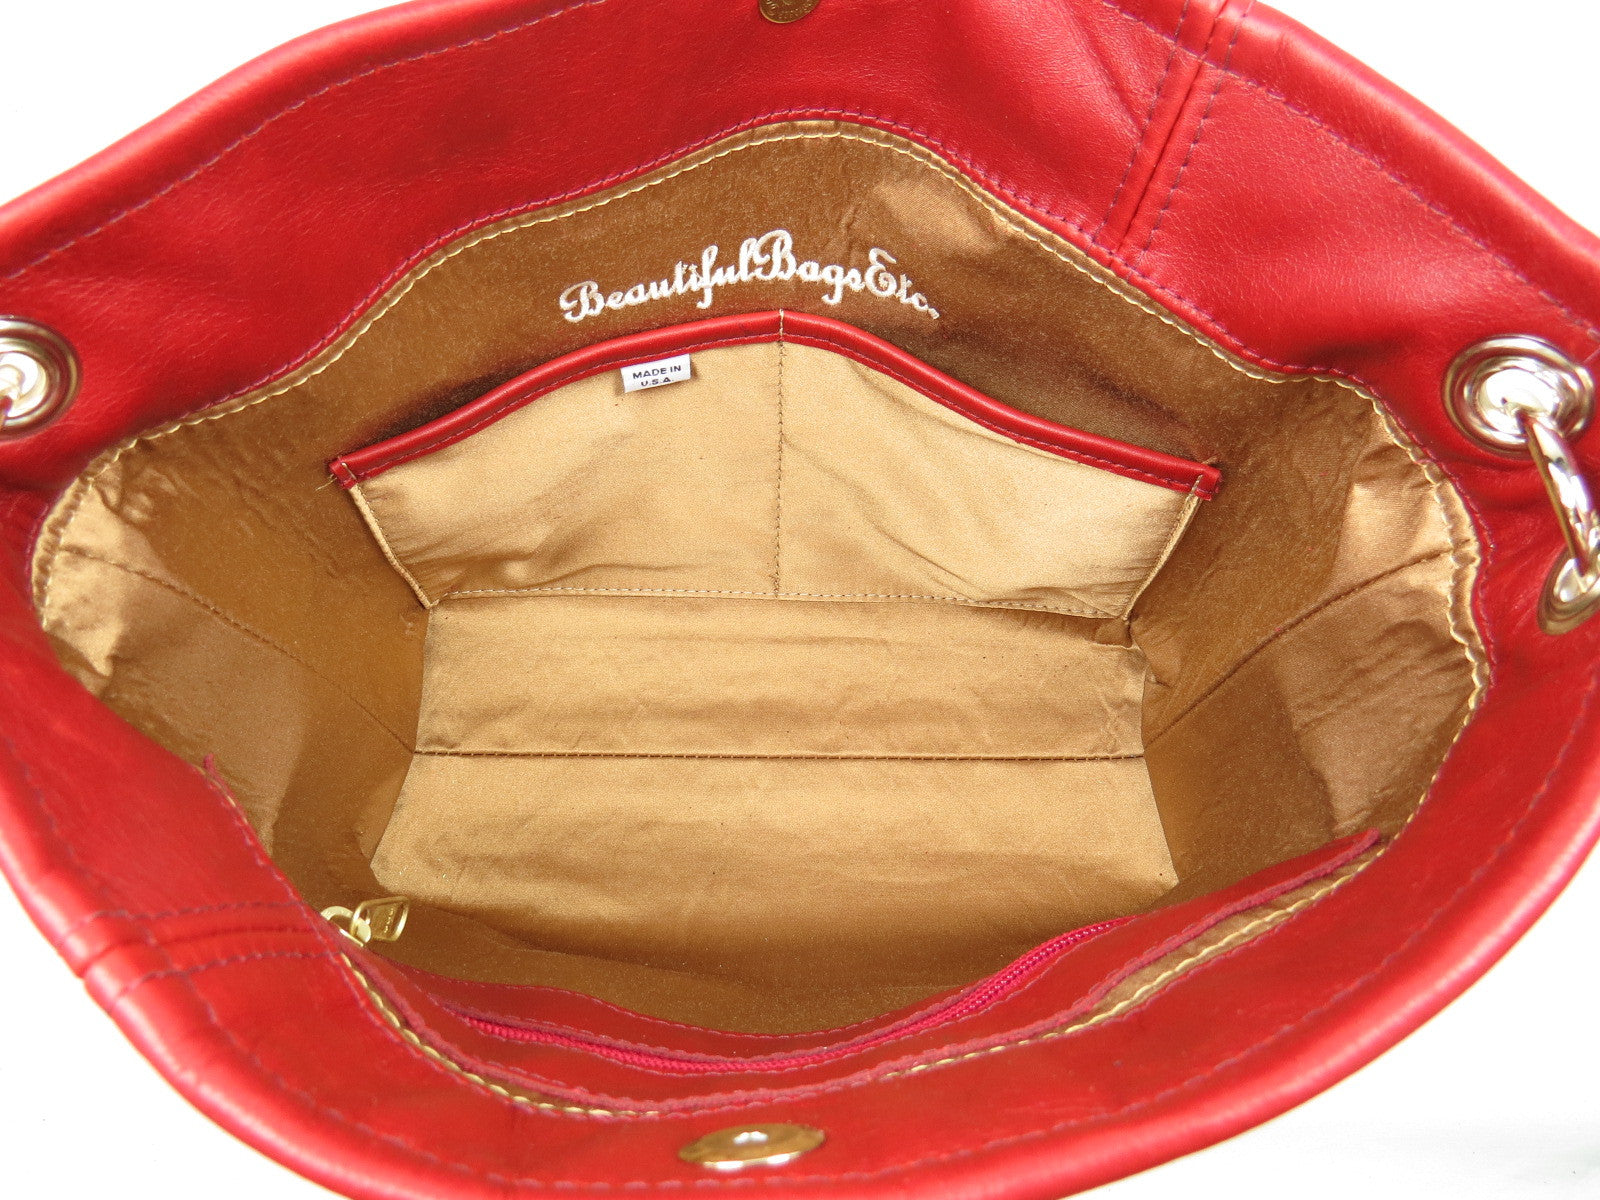 Valentine Hearts Red and White Slouchy Hobo Leather Bag interior dual pockets